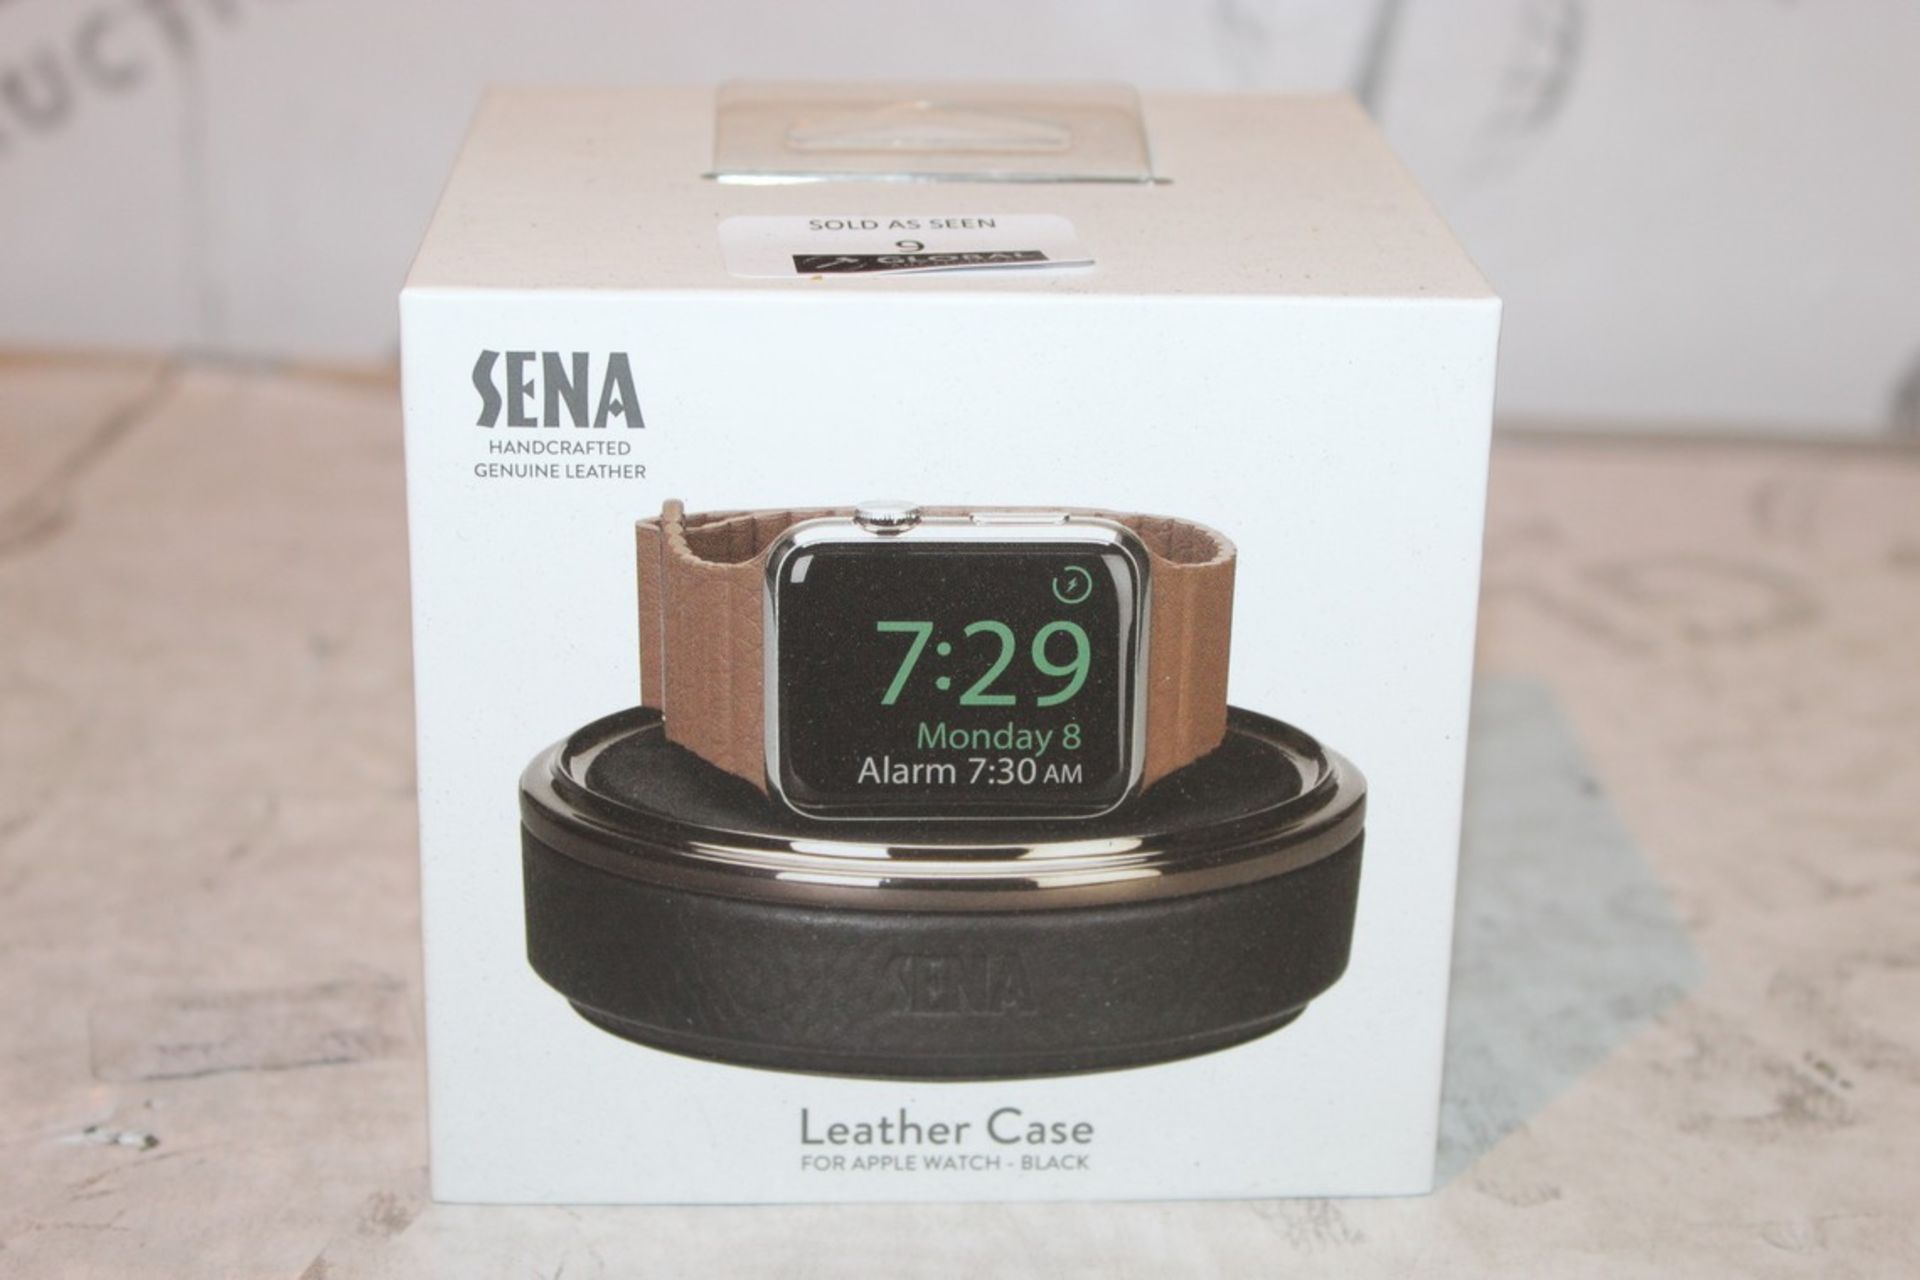 2 Boxed Sena, Black leather Apple Watch Cases, Combined RRP£70.00